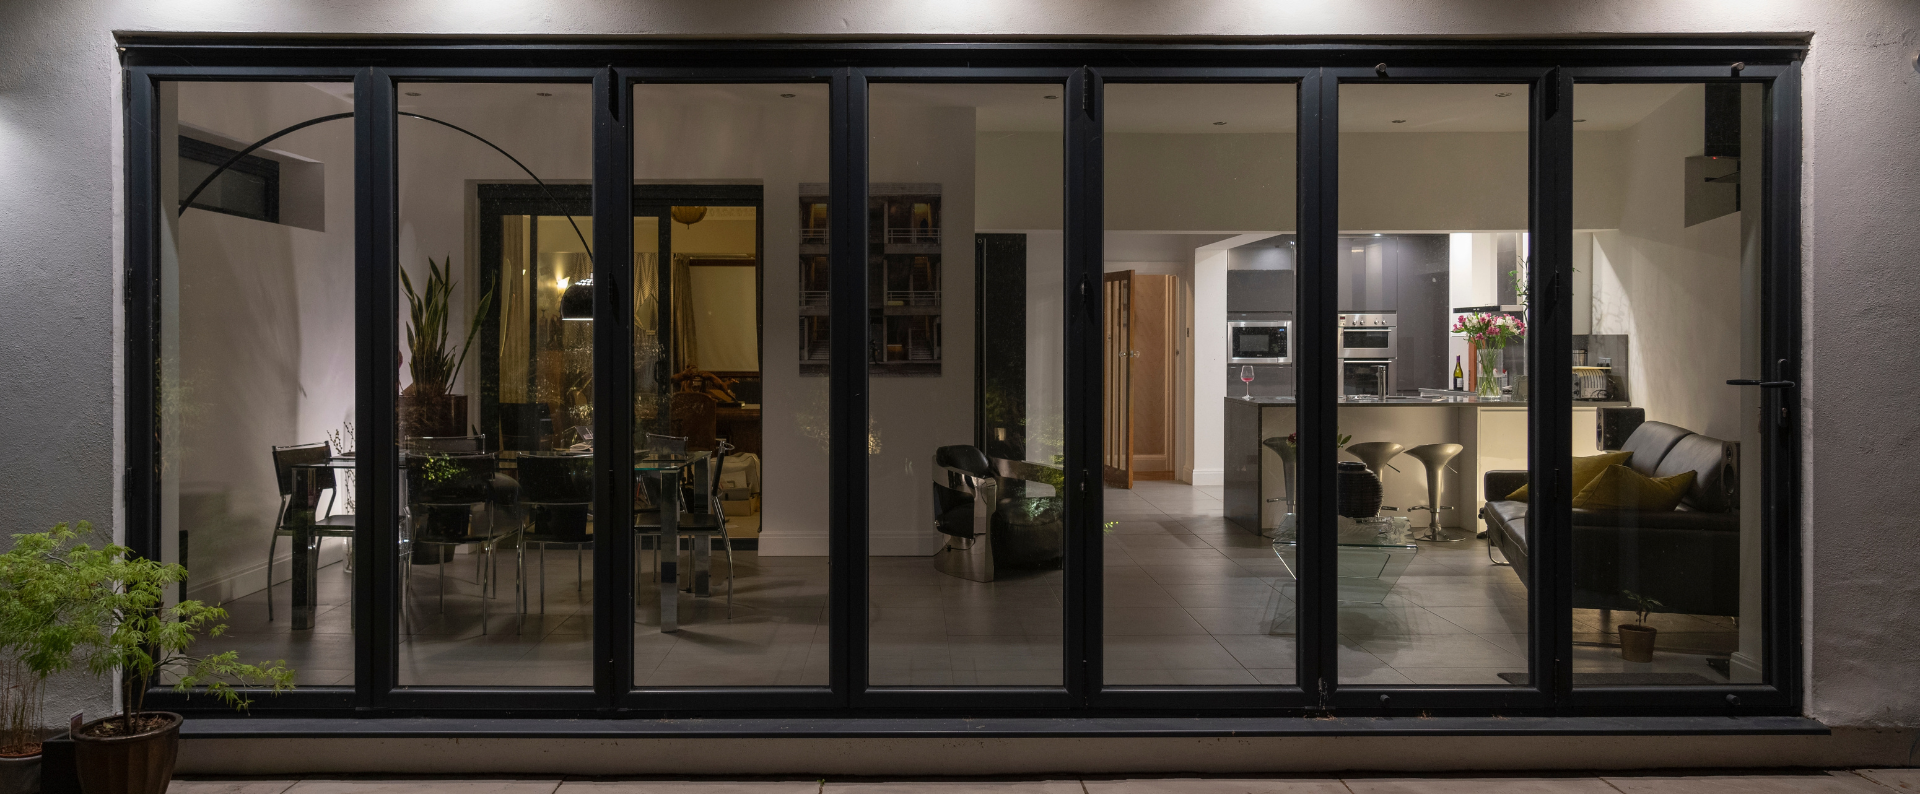 Why You Should Have Garden Bifold Doors for Your Home